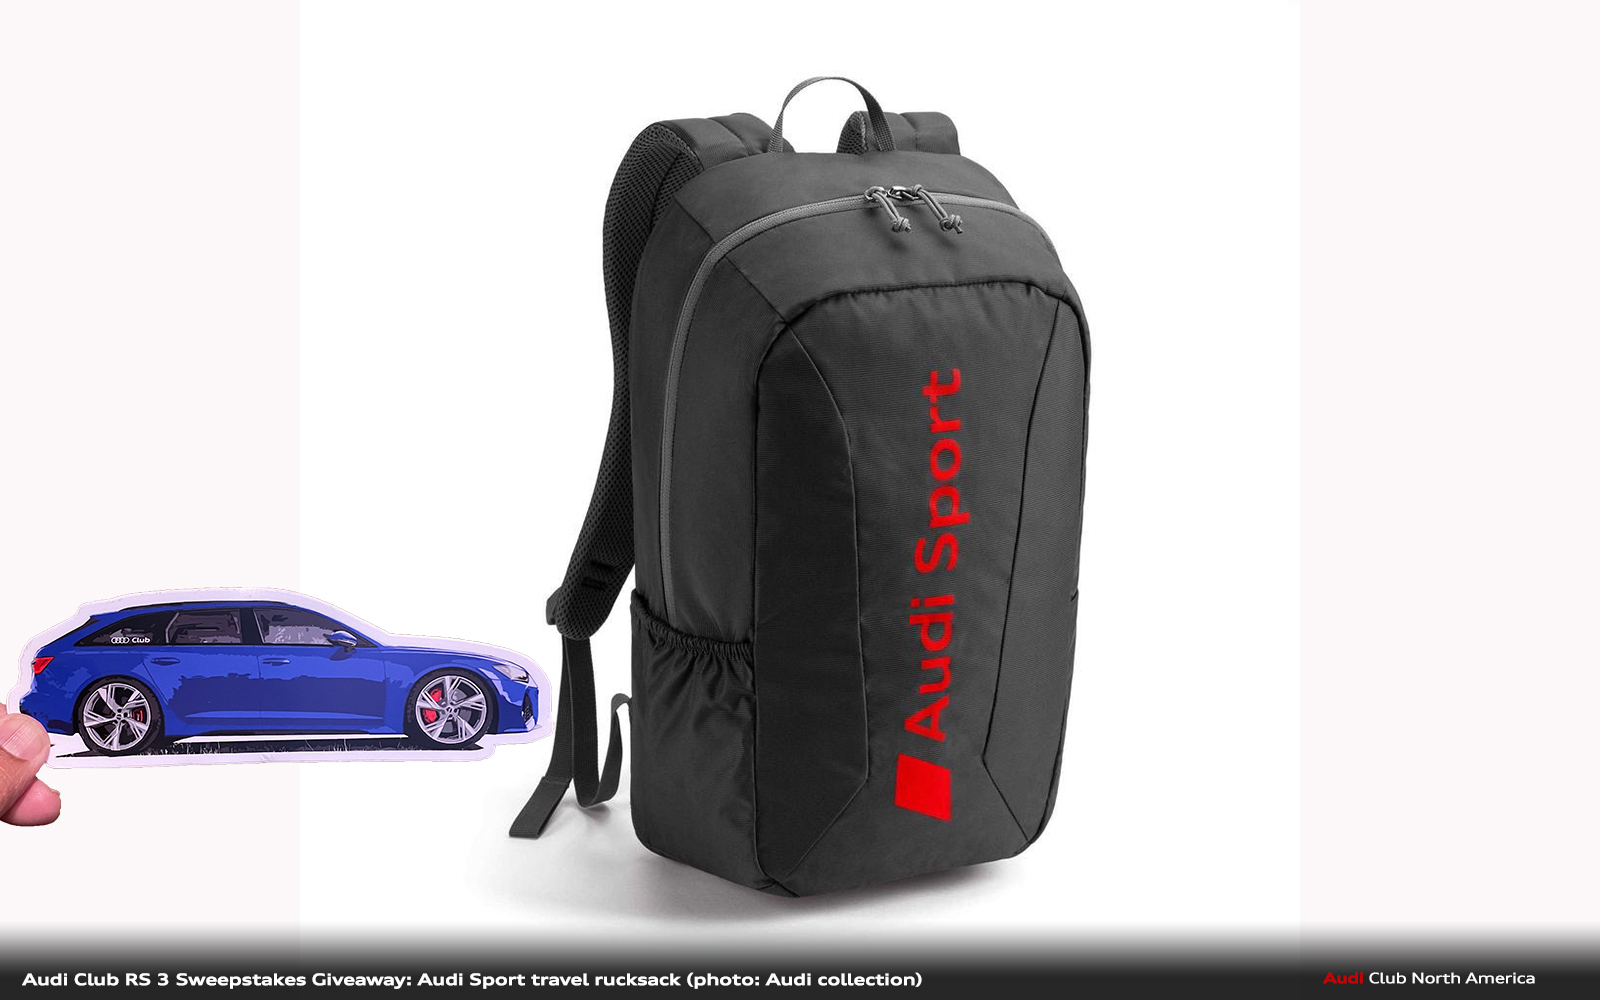 Tribute - RS Sport Travel One Audi Gets Club 6 an Rucksack This Wins North Audi Audi America Everyone and Decal!